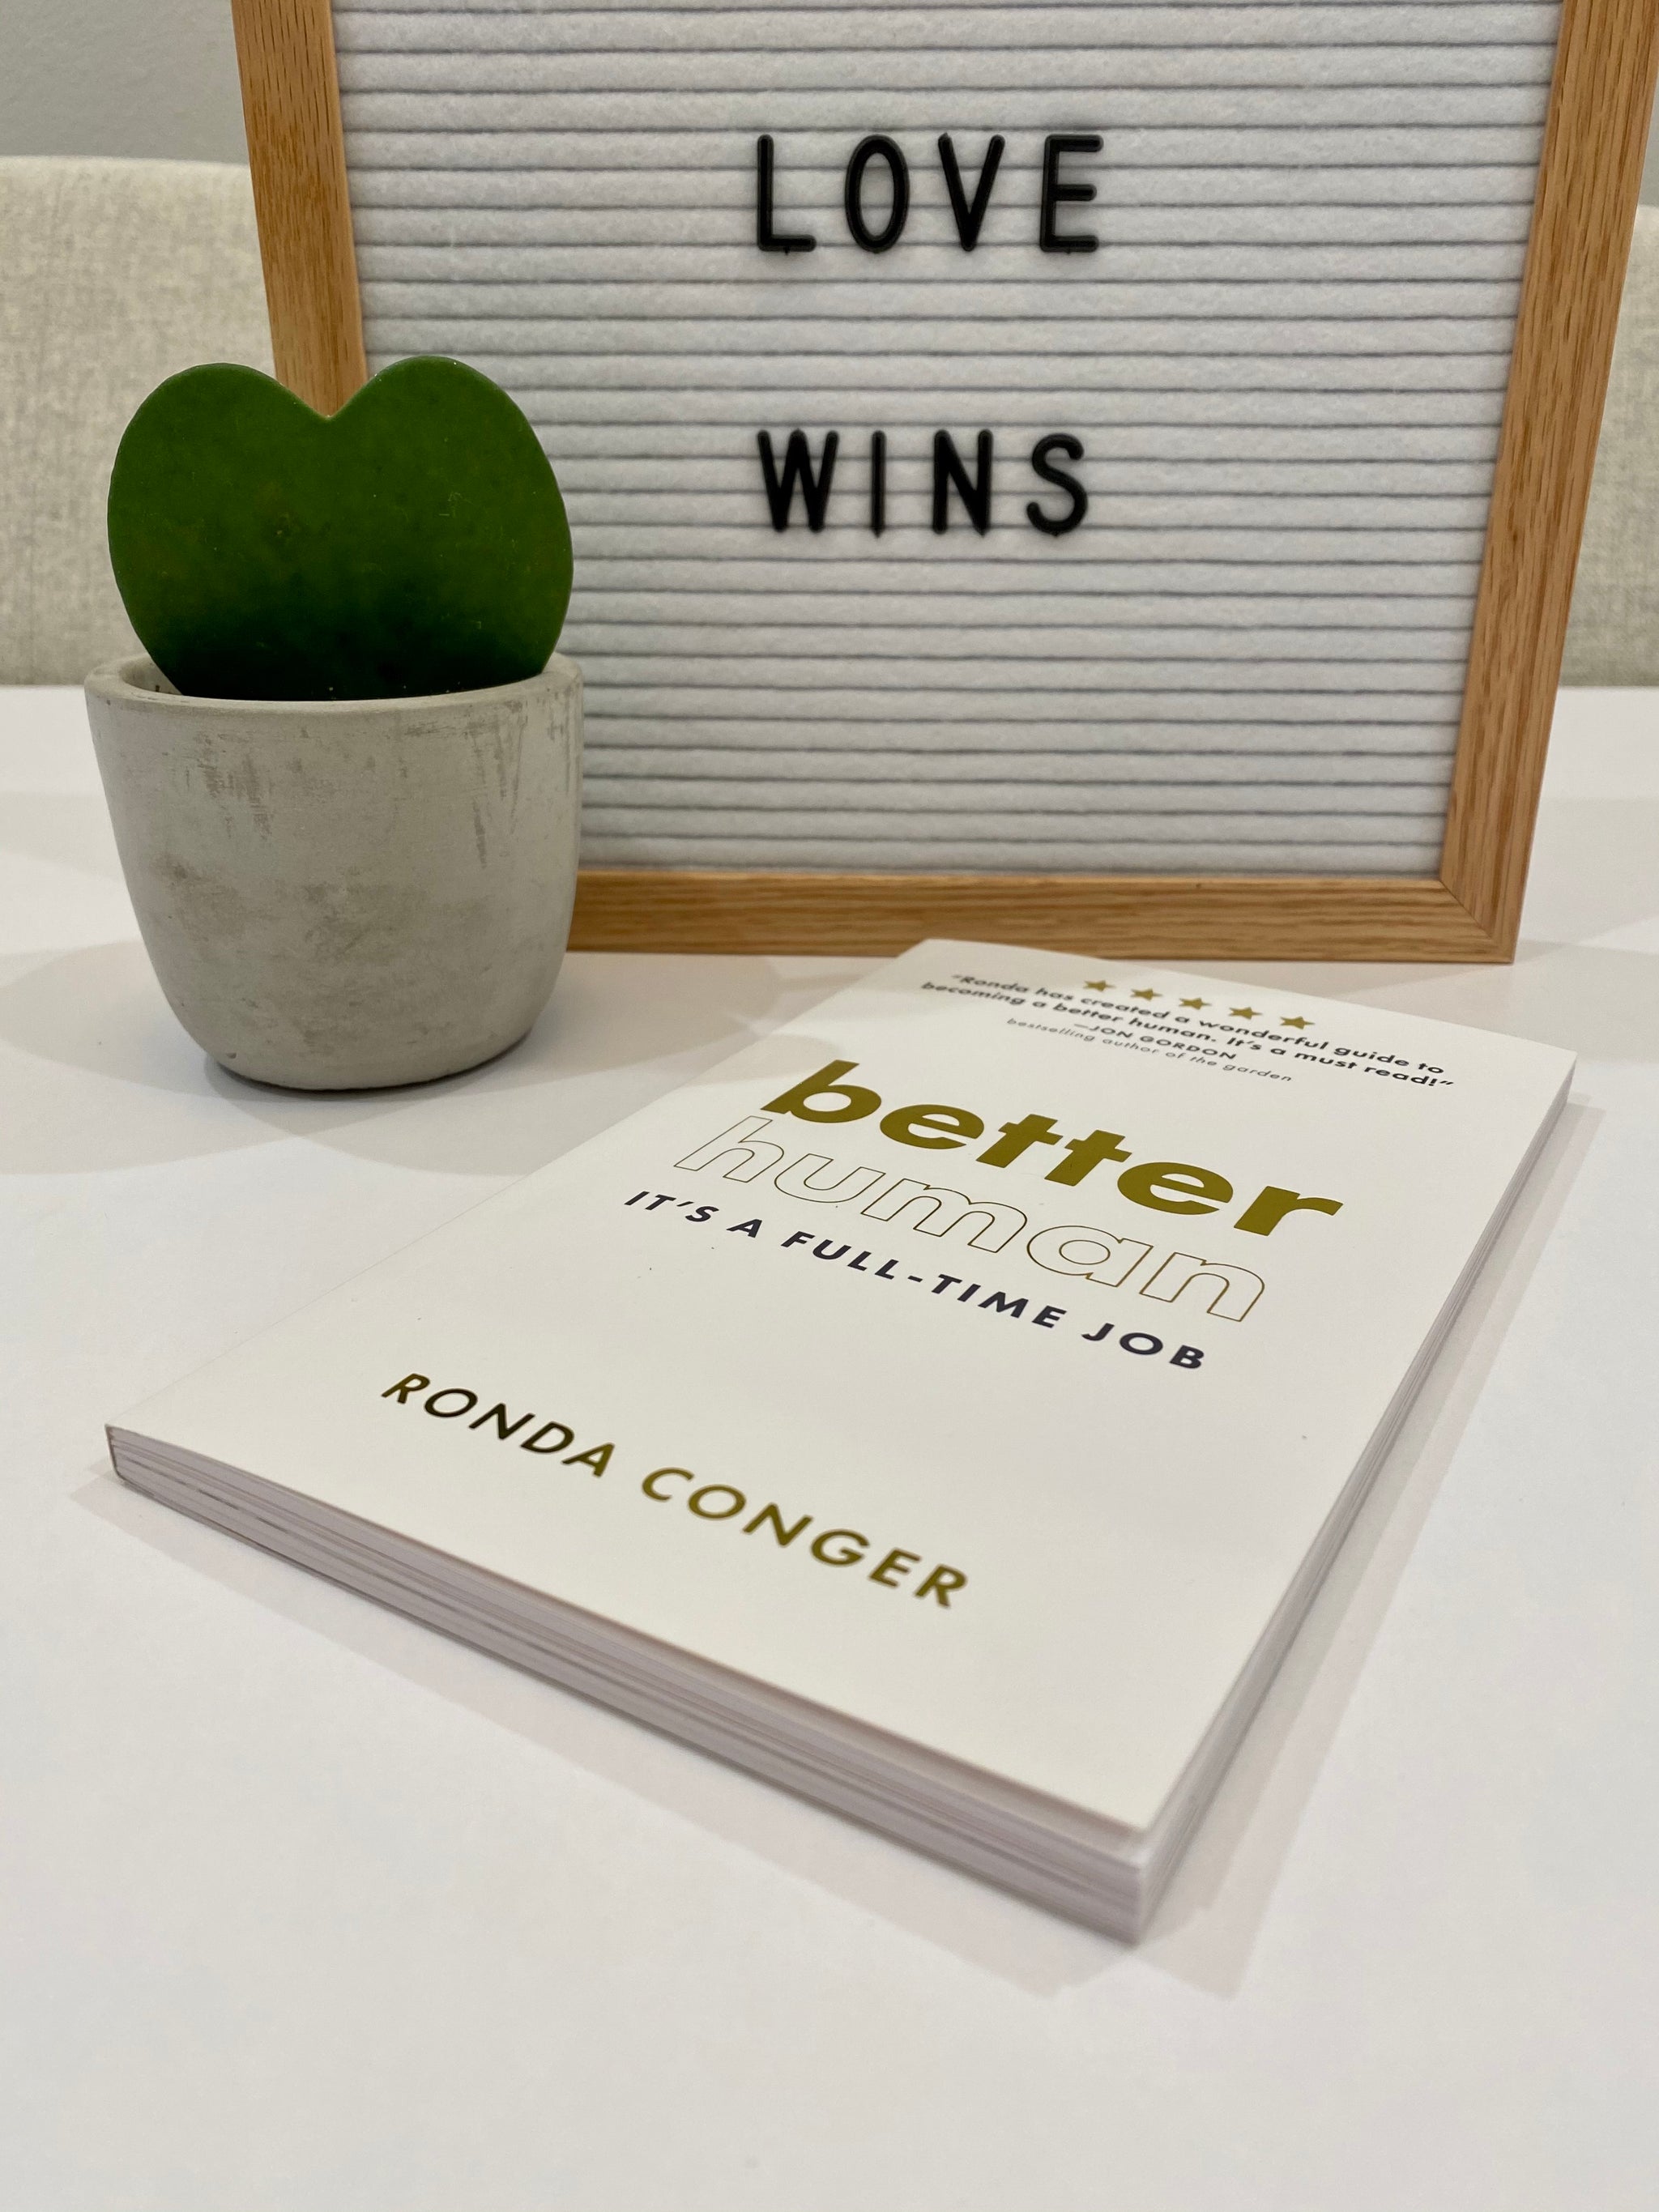 Better Human: It's a Full-Time Job by Ronda Conger - newly revised soft cover